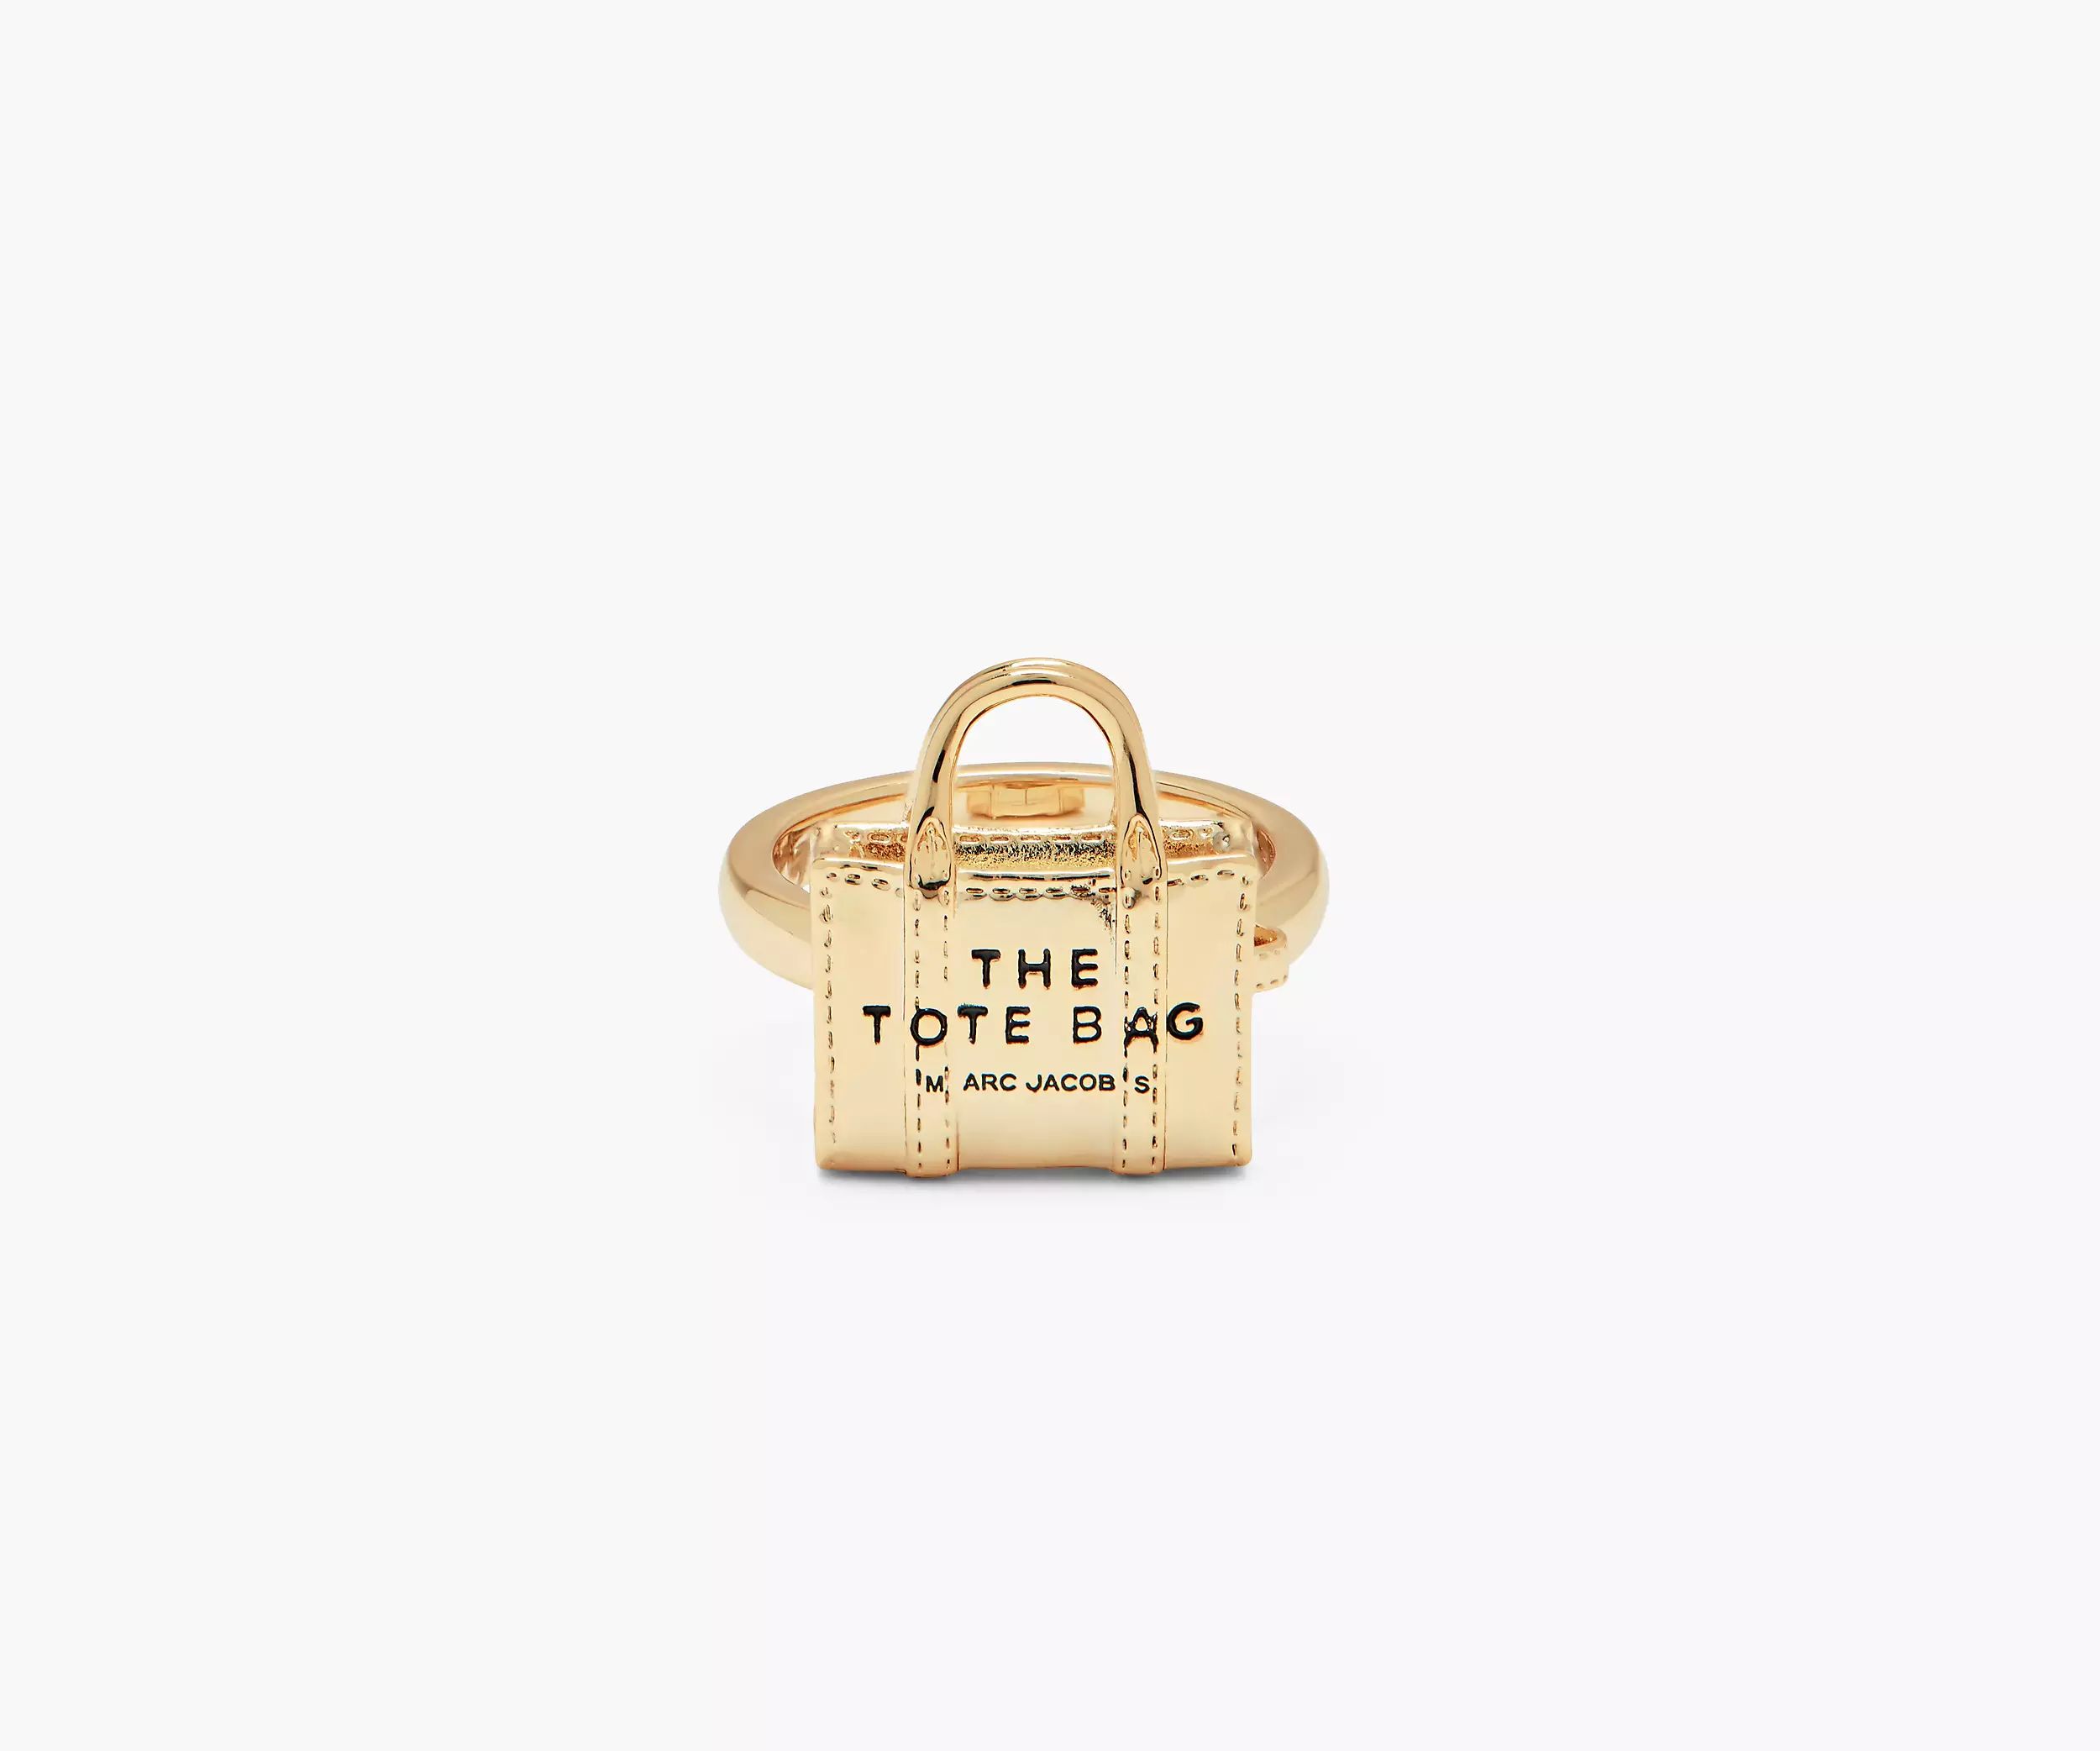 The
Tote Bag Ring | Marc Jacobs